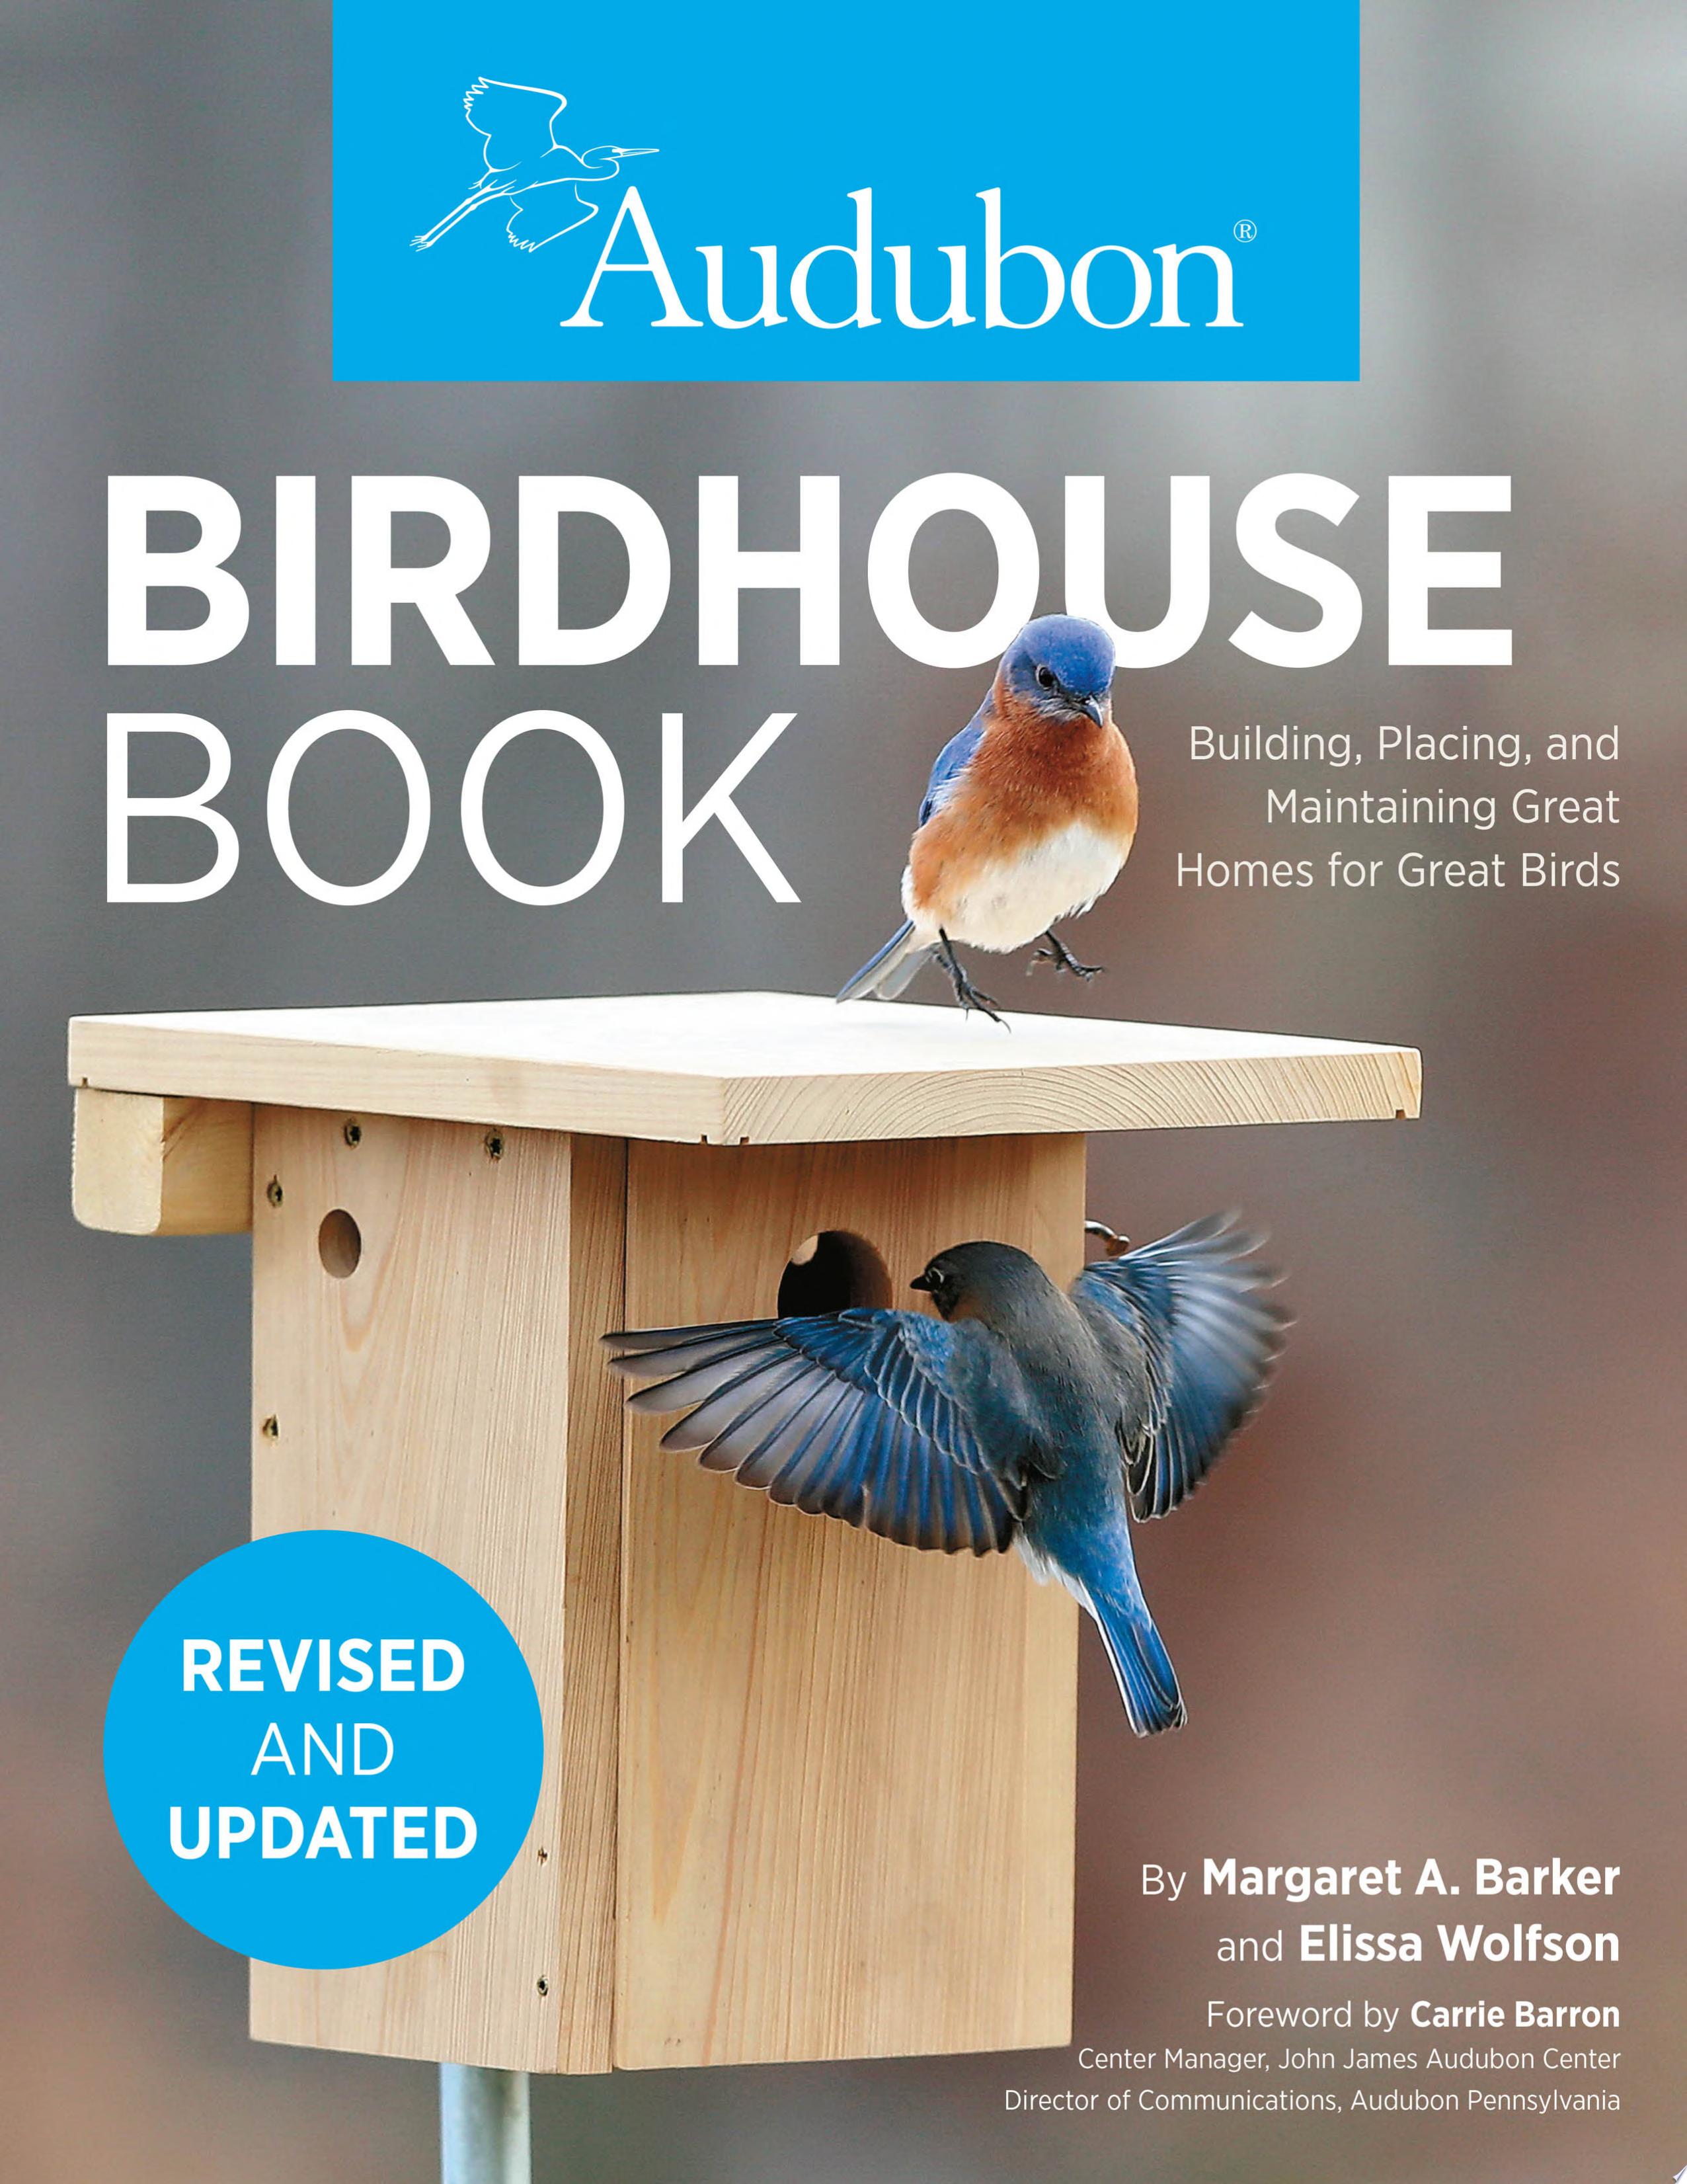 Image for "Audubon Birdhouse Book, Revised and Updated"